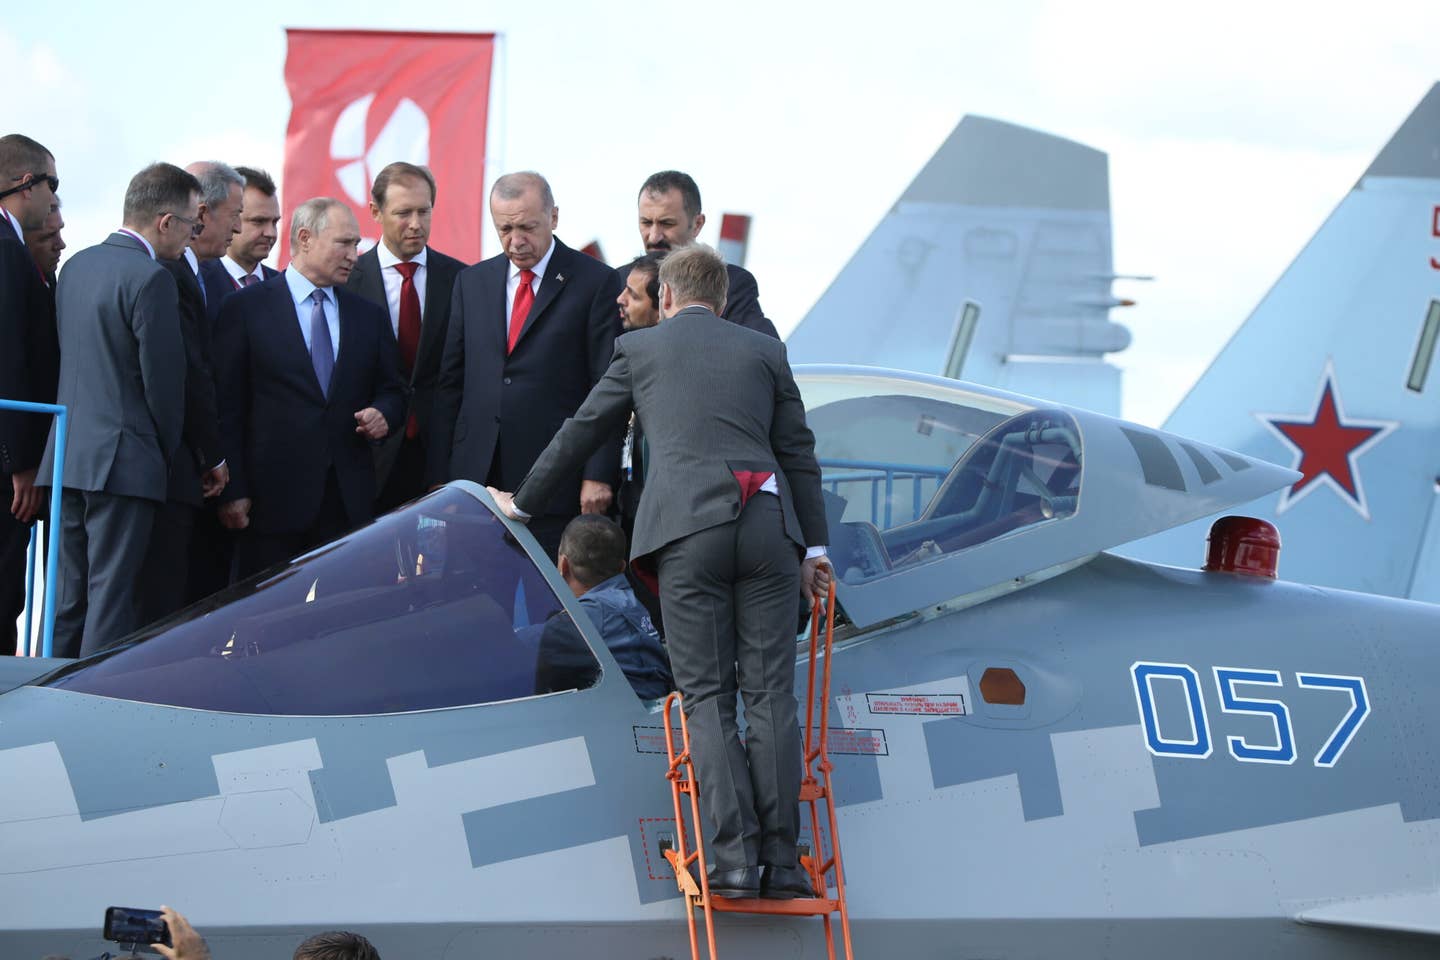 Russian President Vladimir Putin (left) and Turkish President Recep Tayyip Erdogan (right) observe a Su-57 fighter while visiting the MAKS 2019 International Aviation and Space Show in Zhukovsky, outside Moscow, Russia, on August 27, 2019. <em>Photo by Mikhail Svetlov/Getty Images</em>